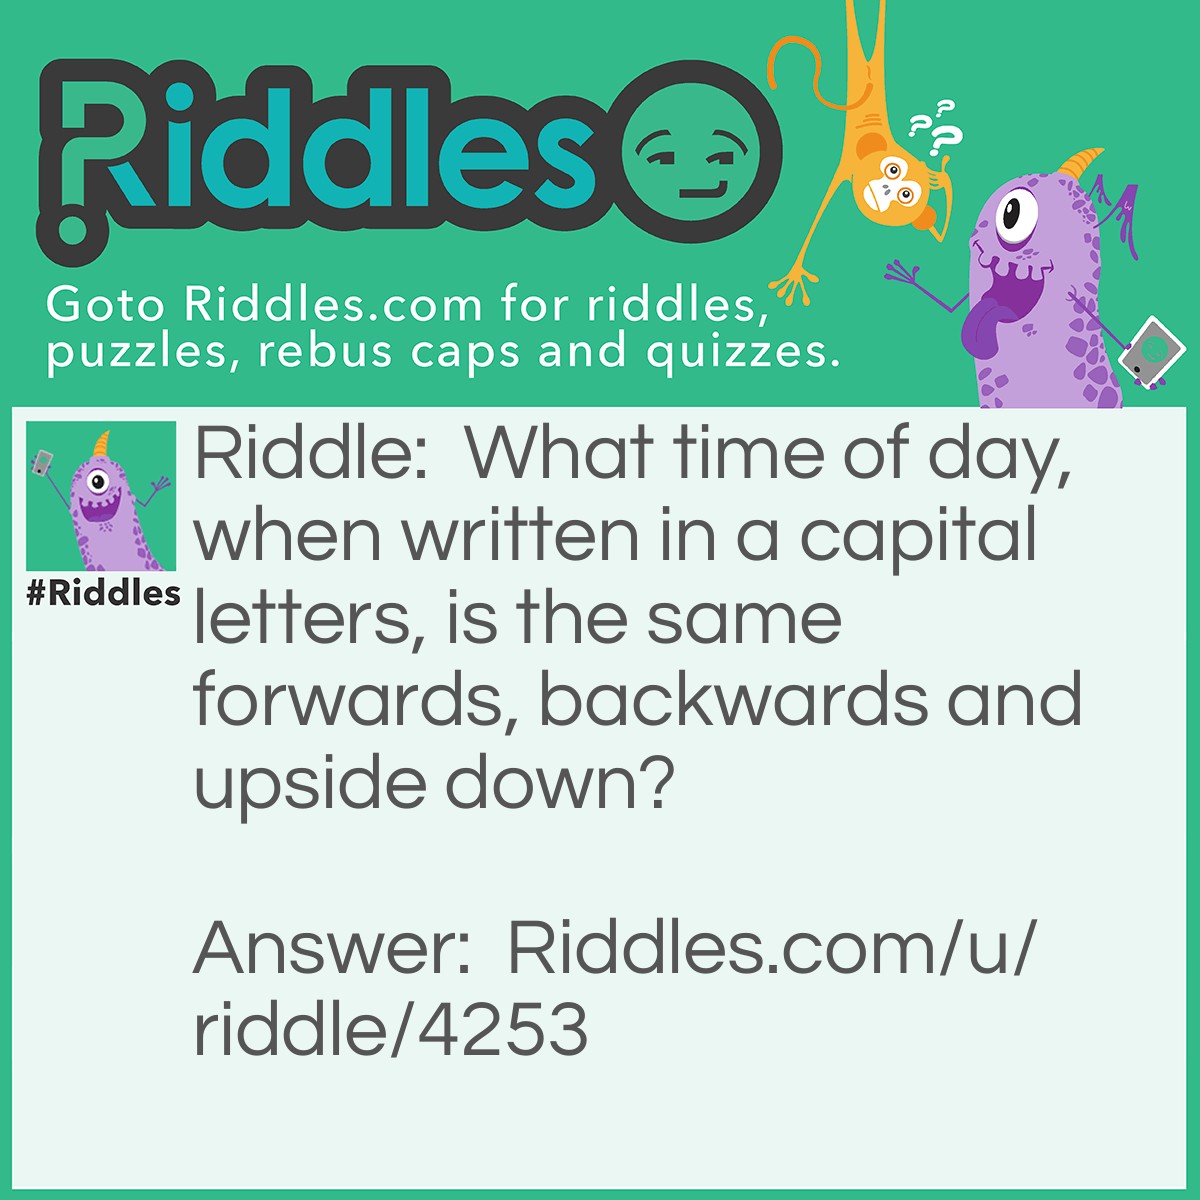 Riddle: What time of day, when written in a capital letters, is the same forwards, backwards and upside down? Answer: Noon.